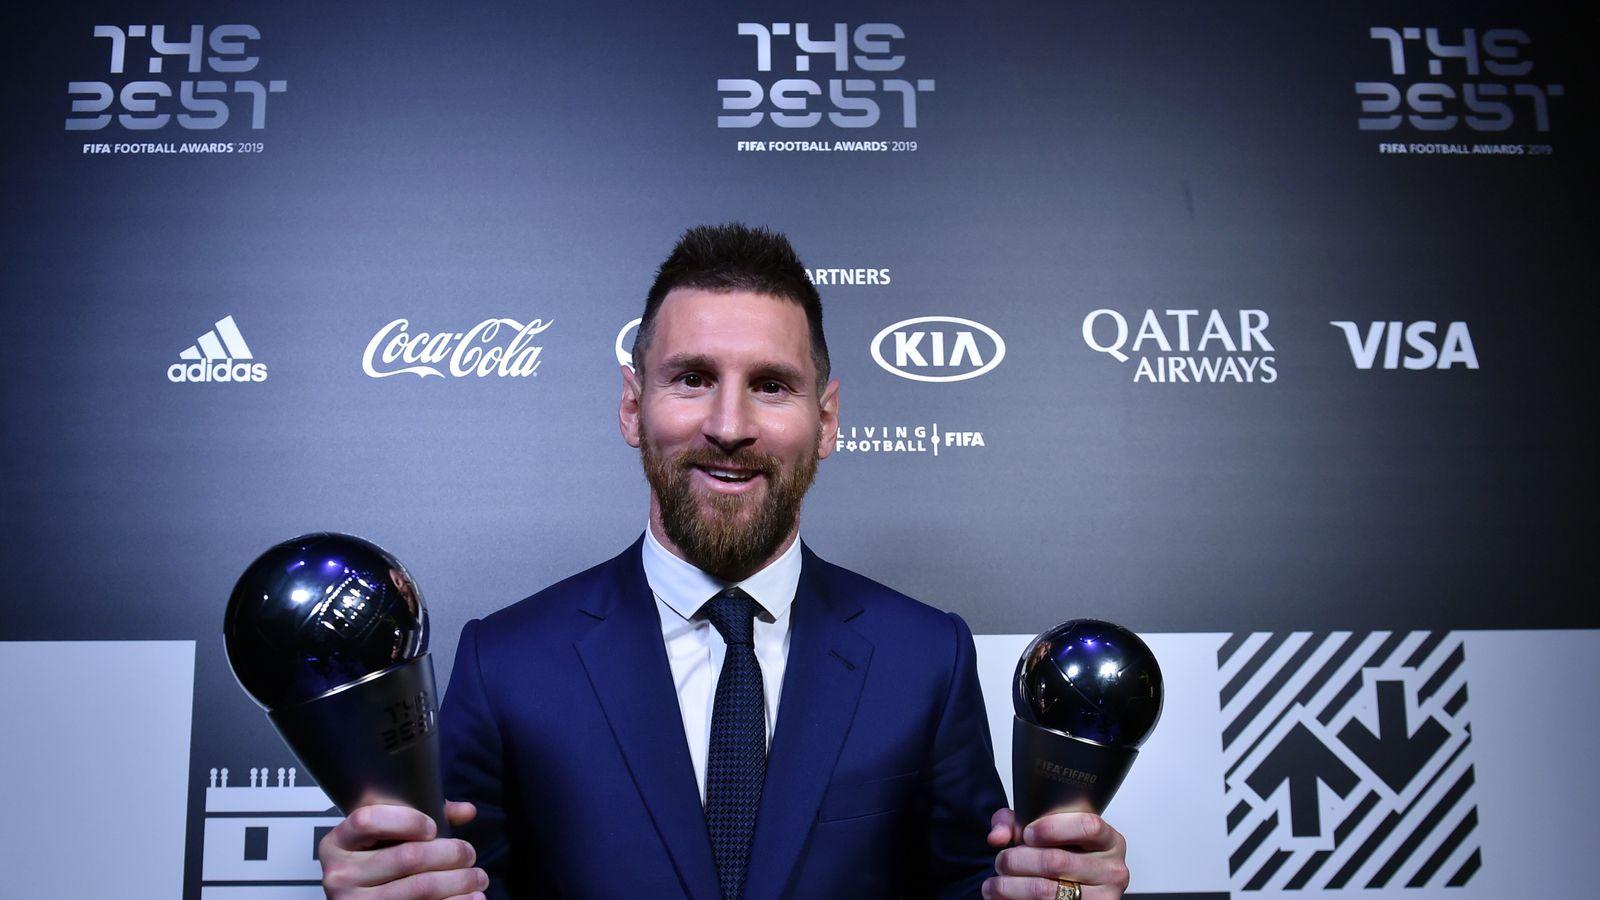 Messi wins FIFA Best Player award IzzSo News travels fast